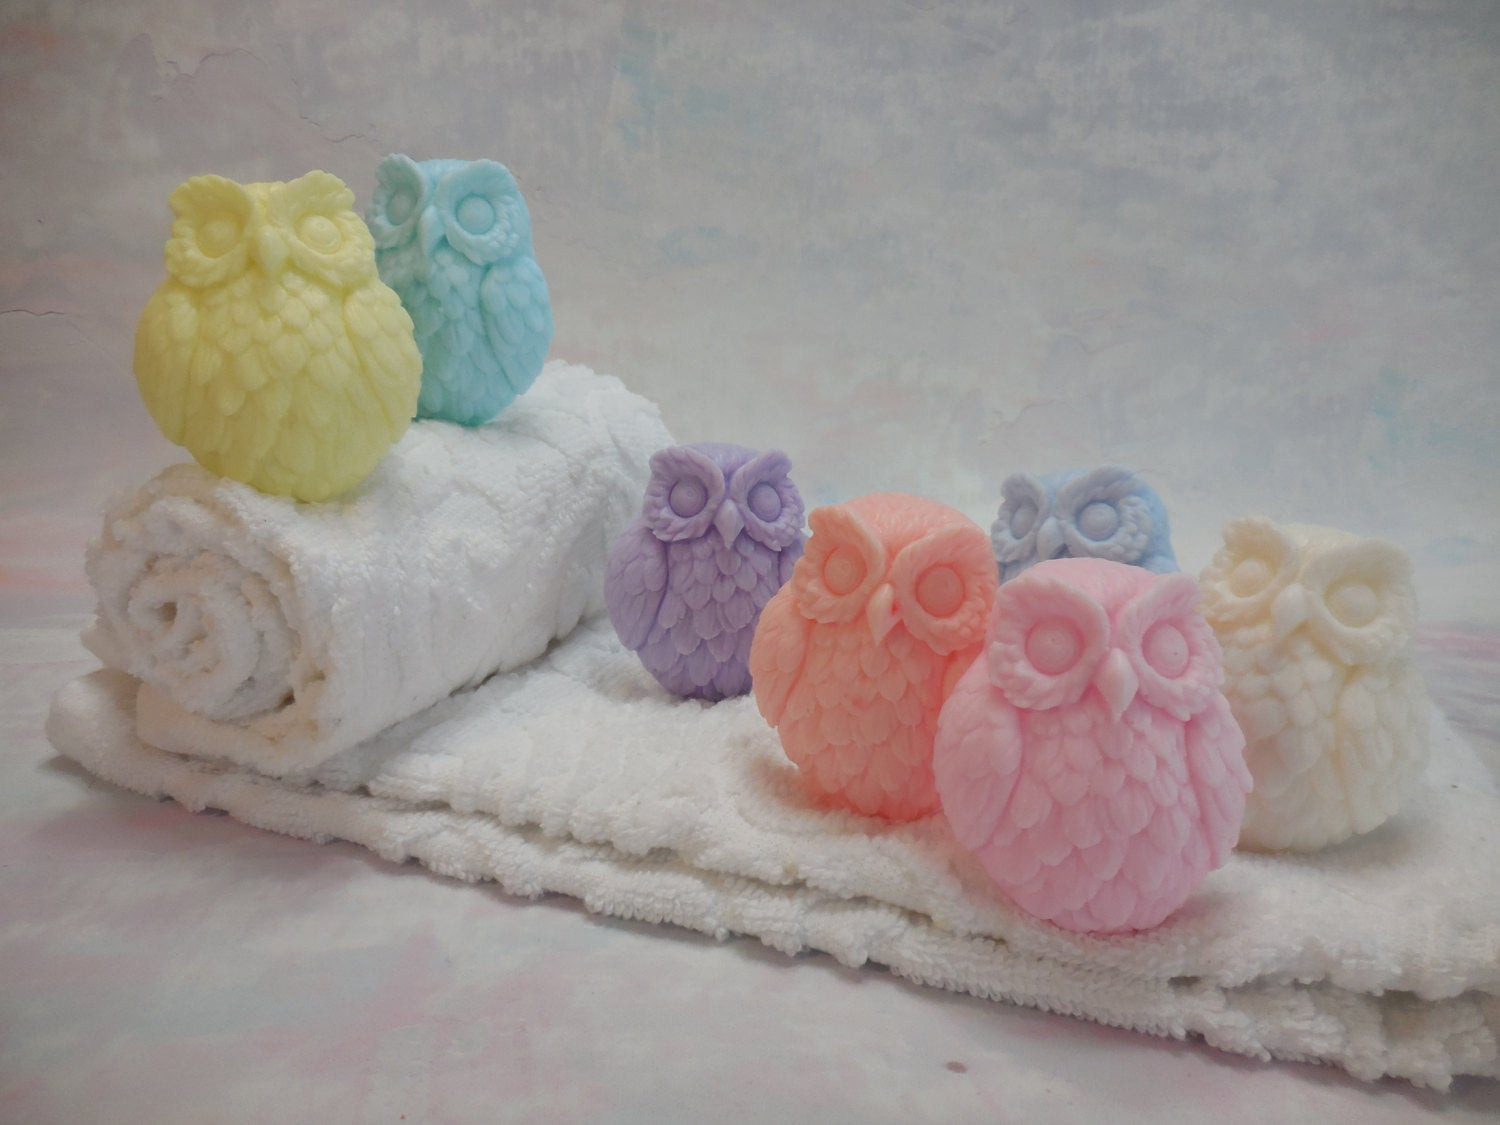 Owl Baby Shower Gifts
 Owl Soaps Owl Baby Shower Baby Shower Favor Owl Bridal